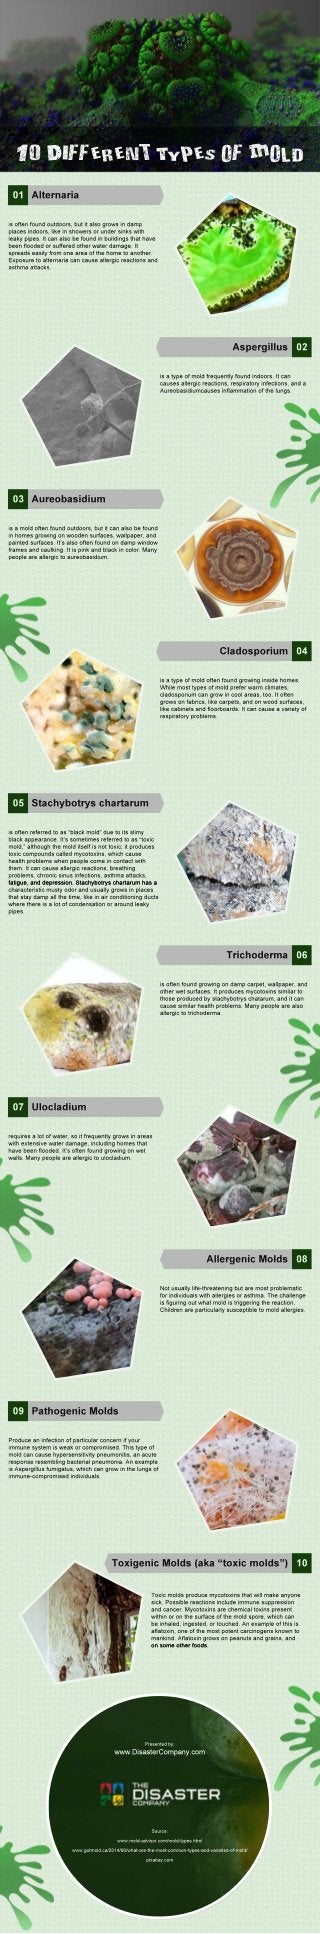 10 Different Types of Mold